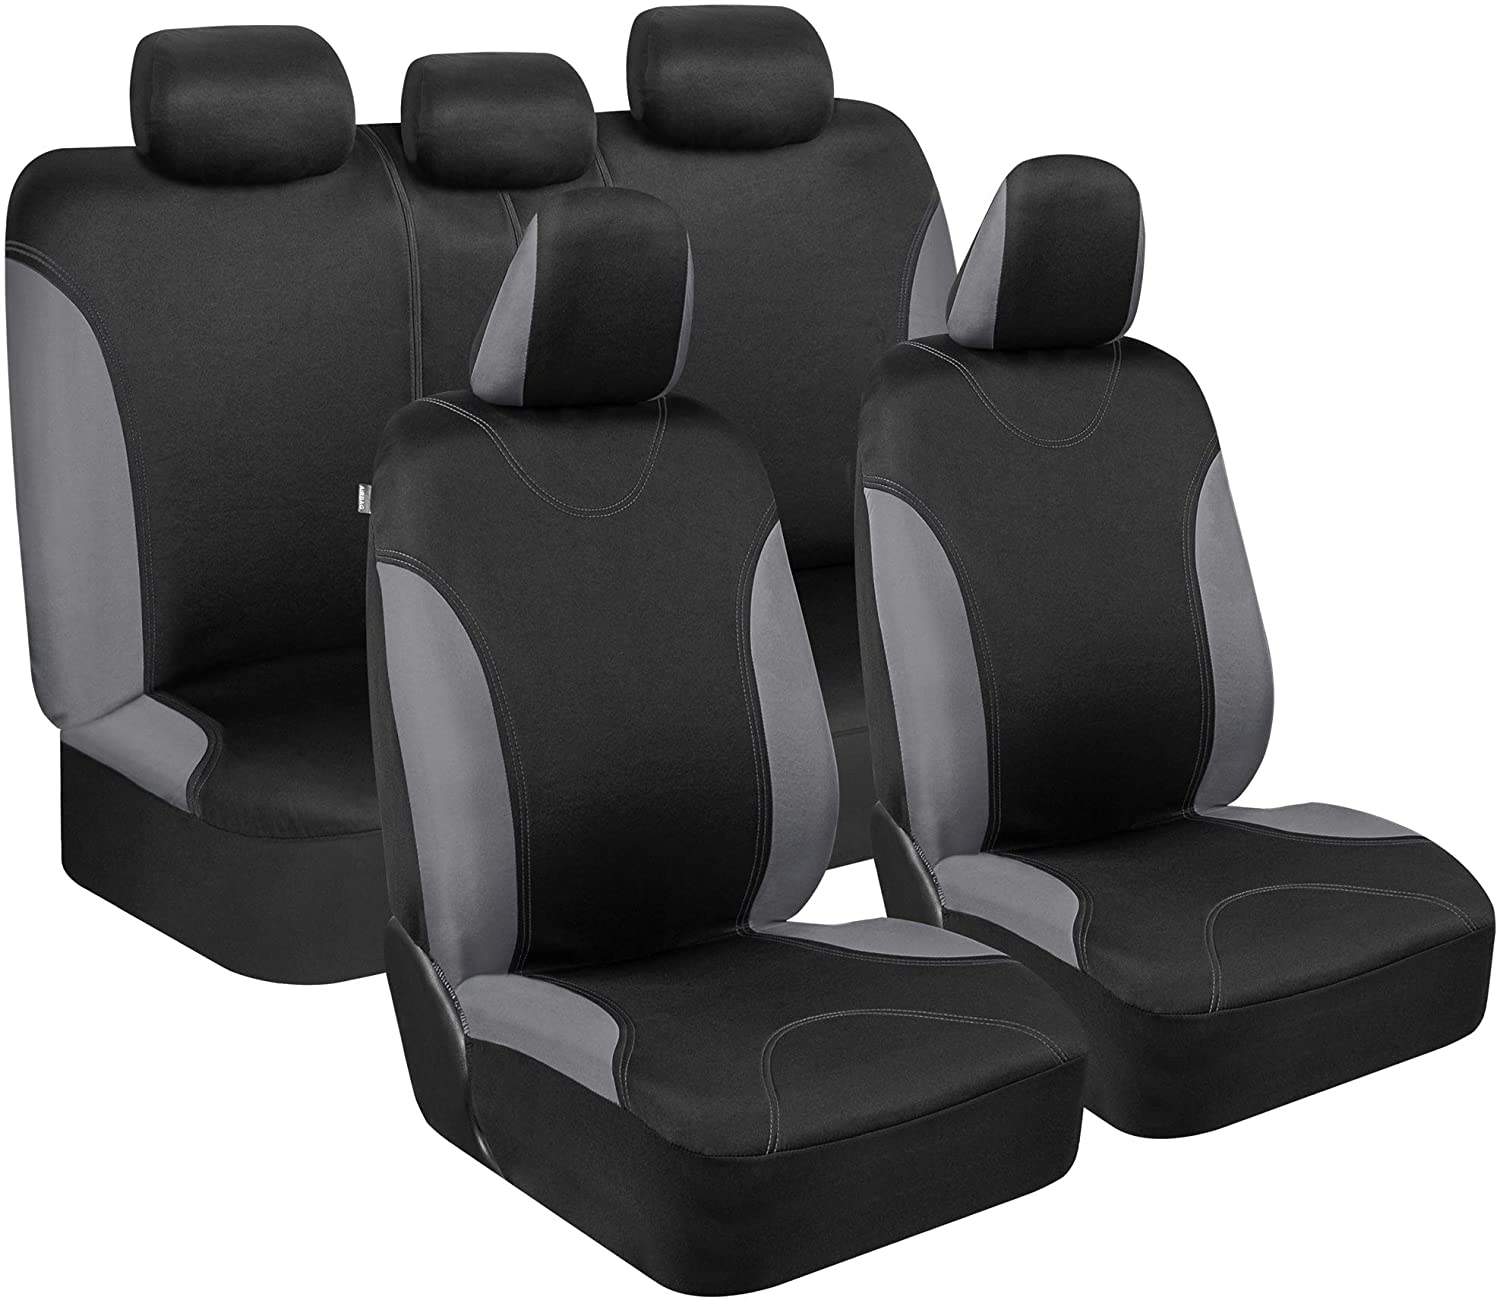 10 Best Seat Covers For Toyota Tundra Wonderful Engineerin